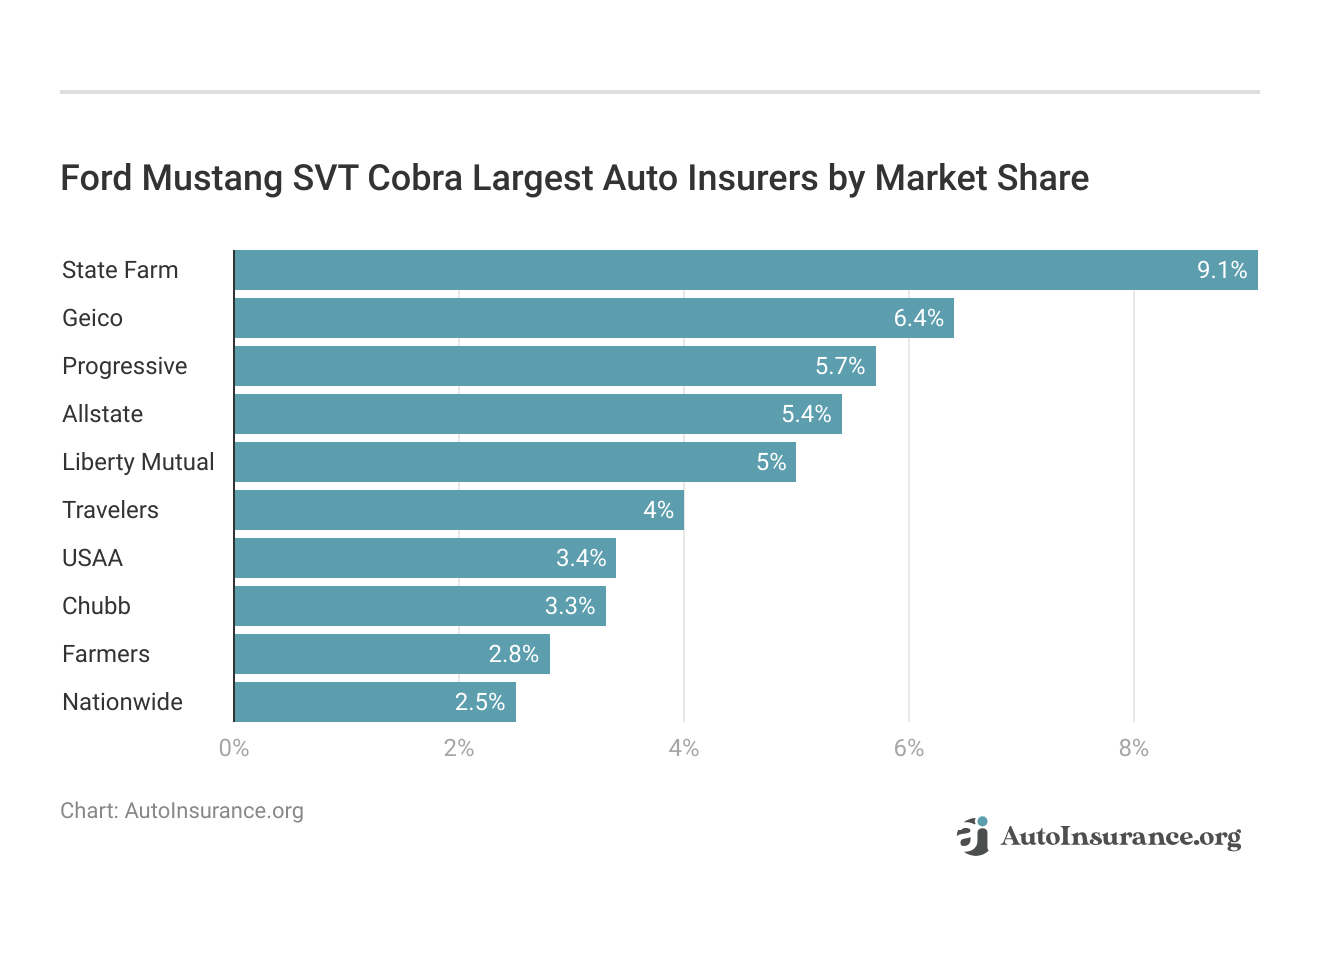 <h3>Ford Mustang SVT Cobra Largest Auto Insurers by Market Share</h3>